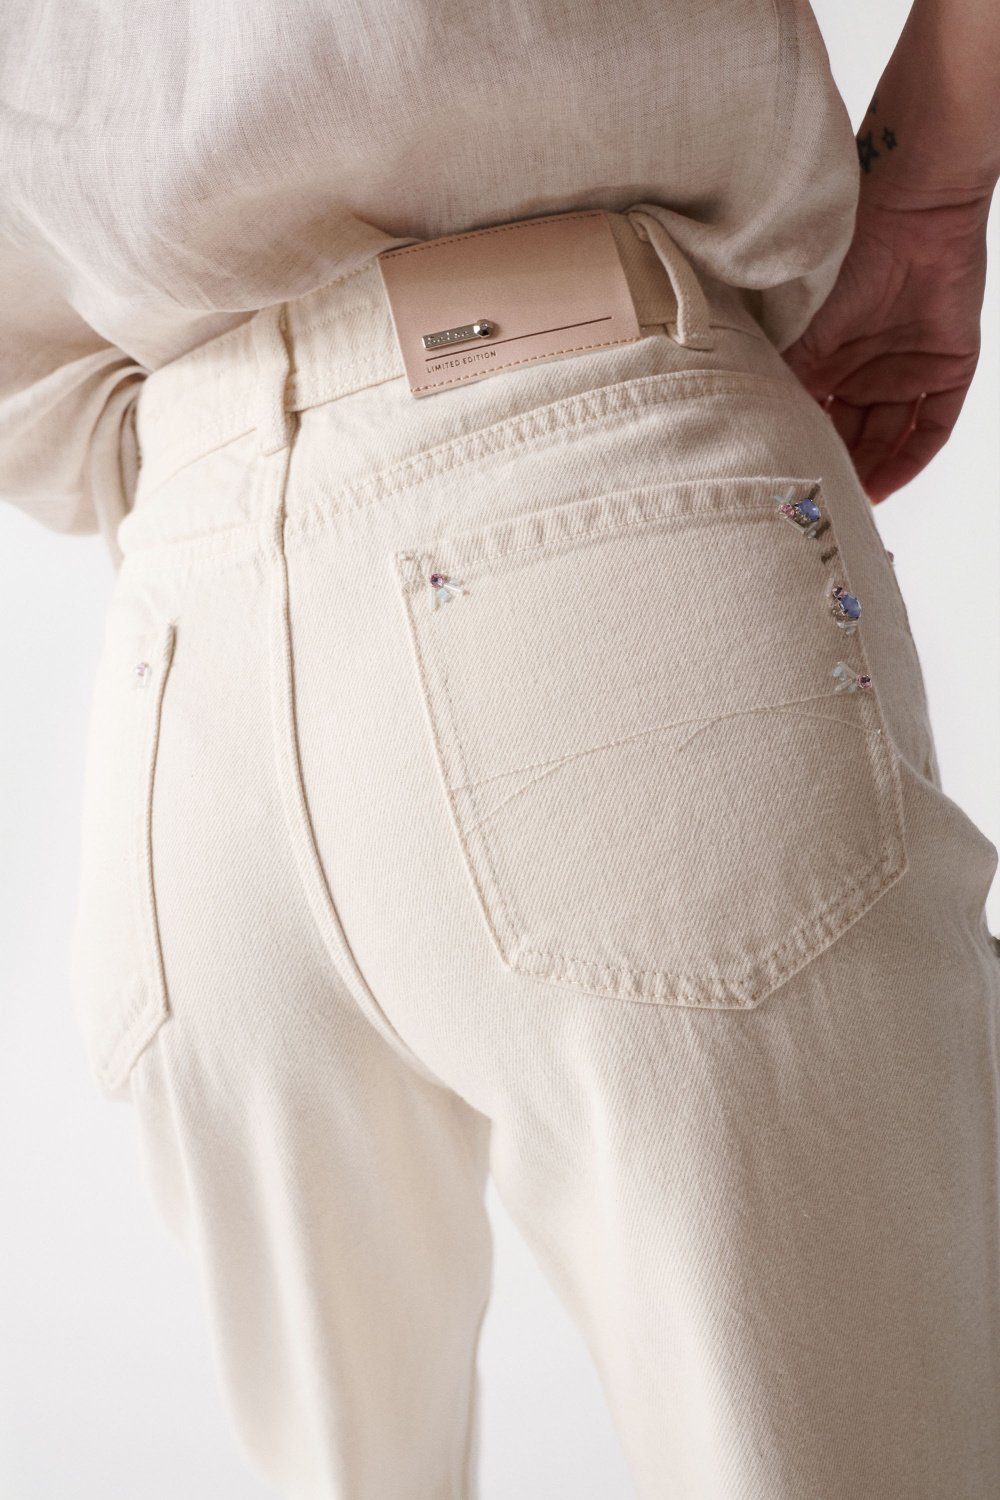 Limited edition high rise jeans, unbleached - Salsa